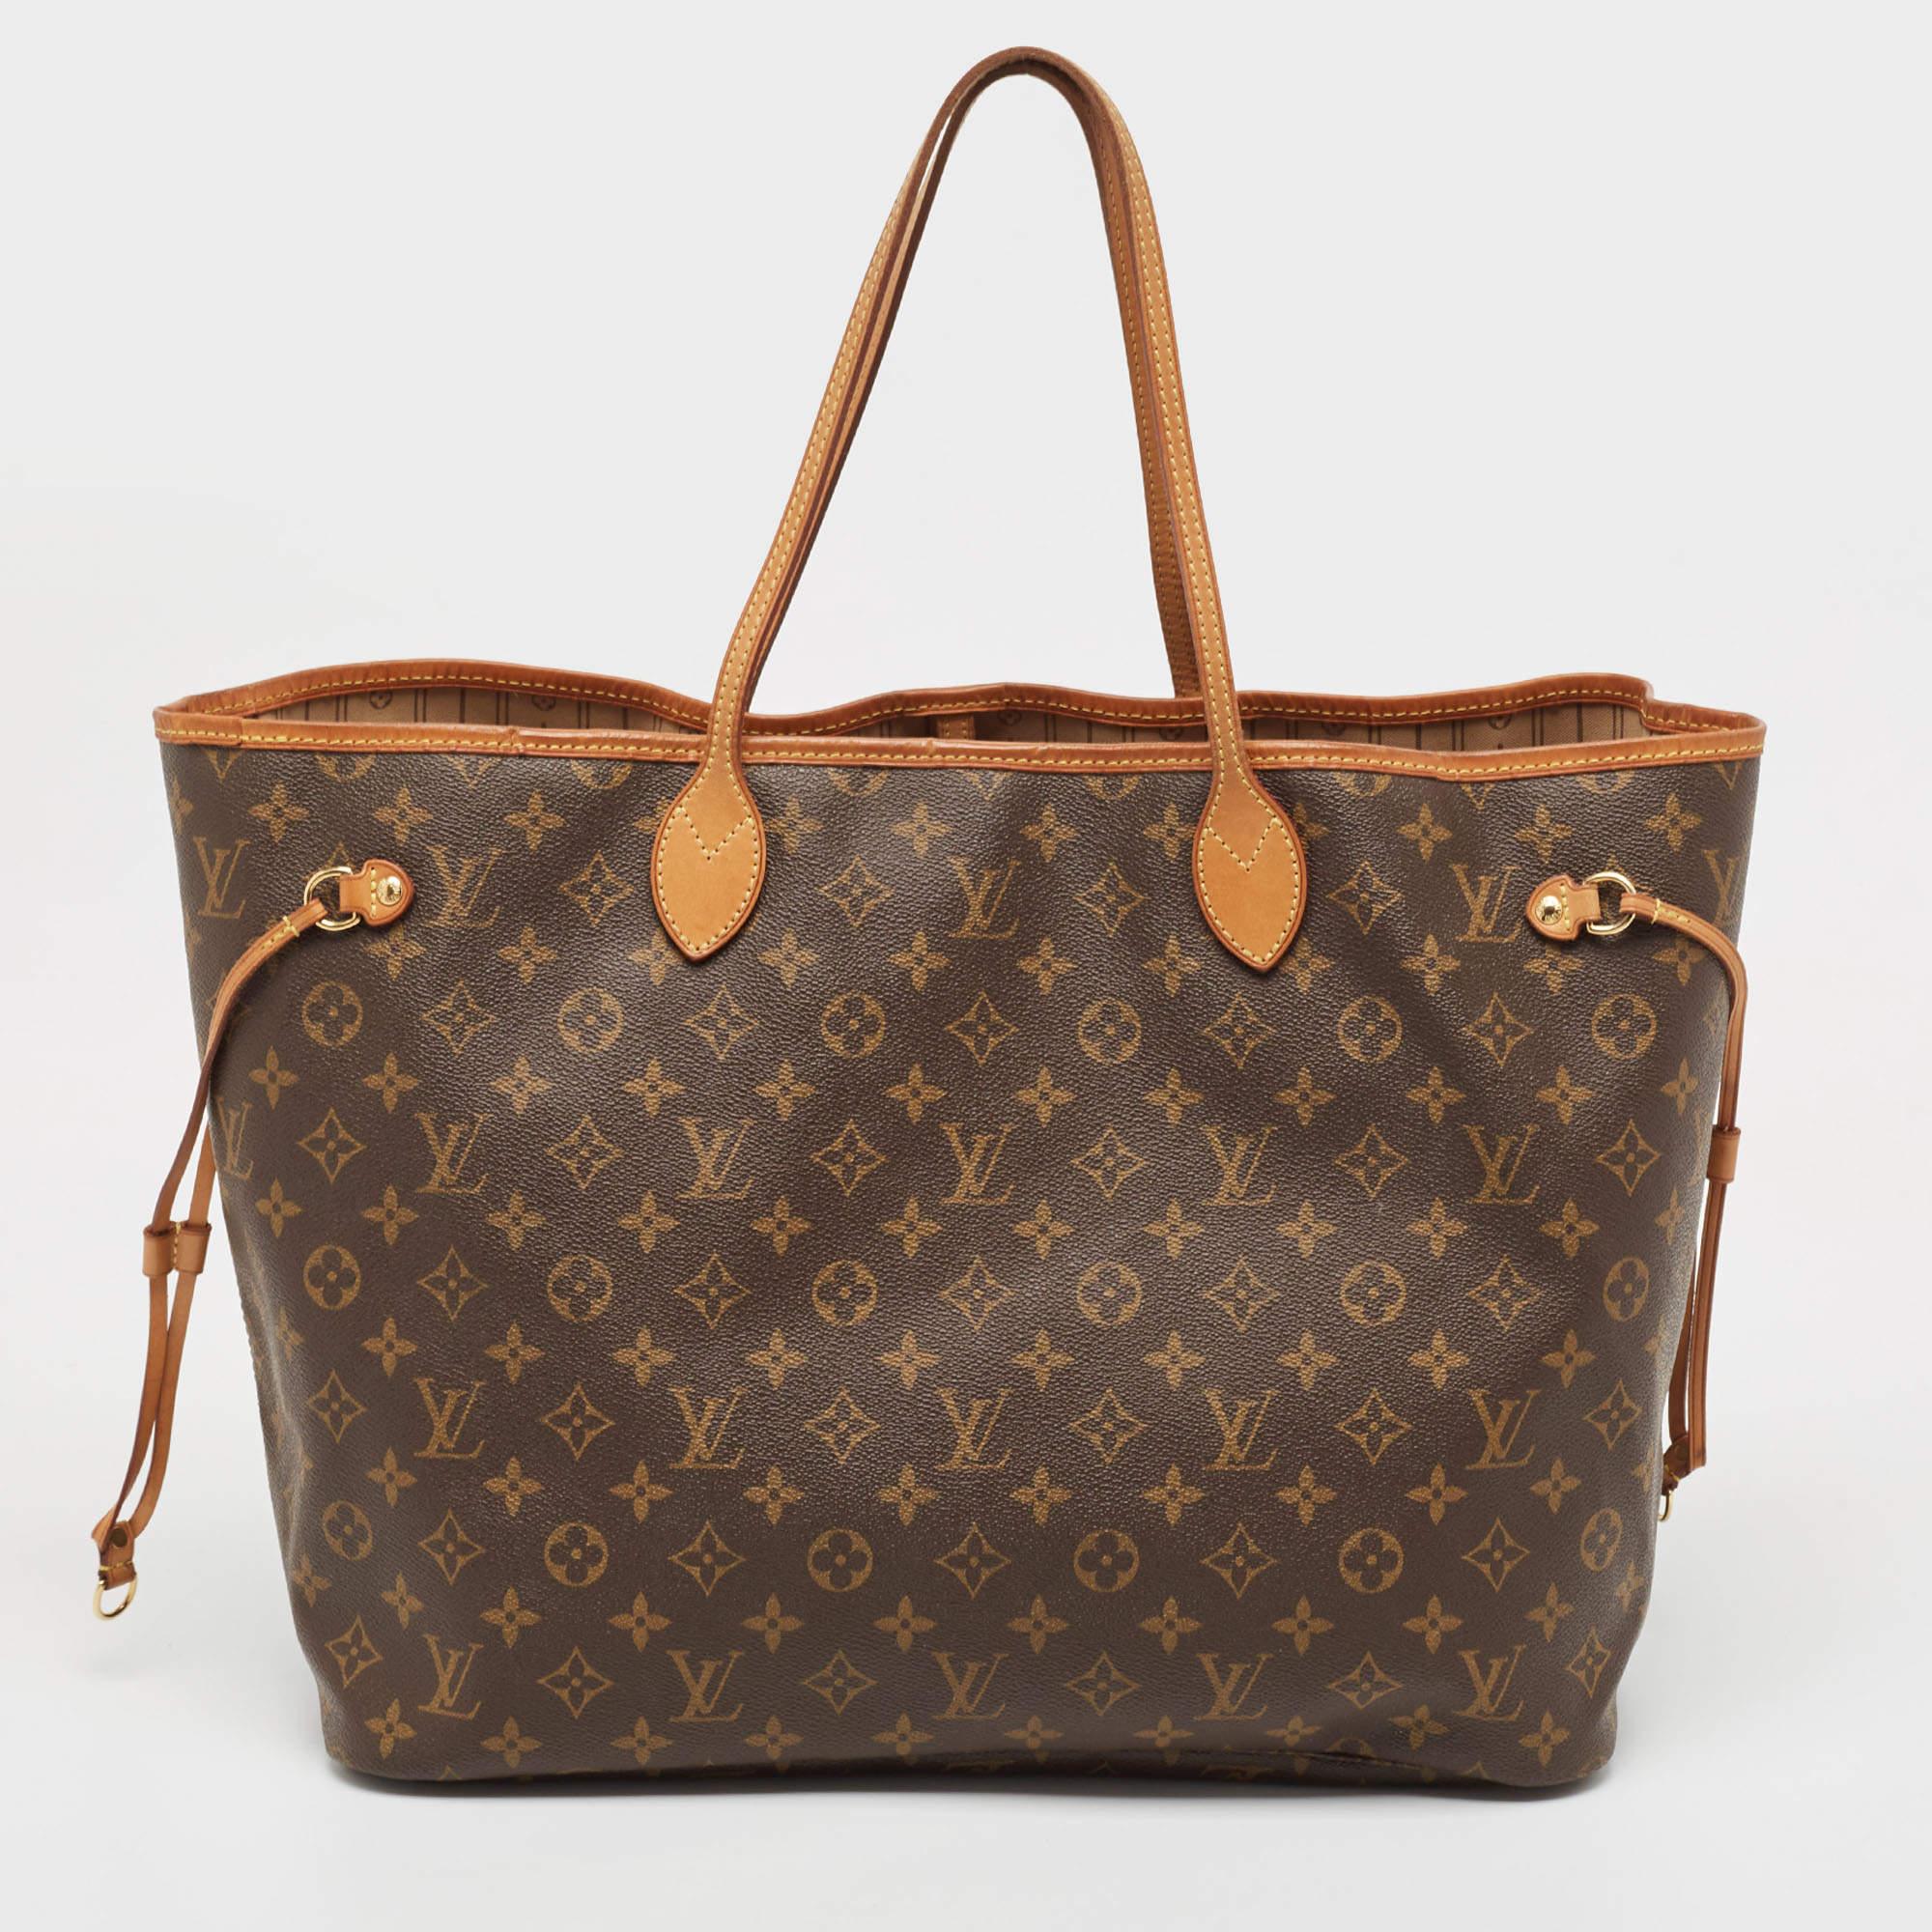 Introduced in 2007, the Neverfull by Louis Vuitton is an all-time classic. This GM-size Neverfull comes crafted from Monogram canvas and has two leather handles.

Includes: Original Dustbag